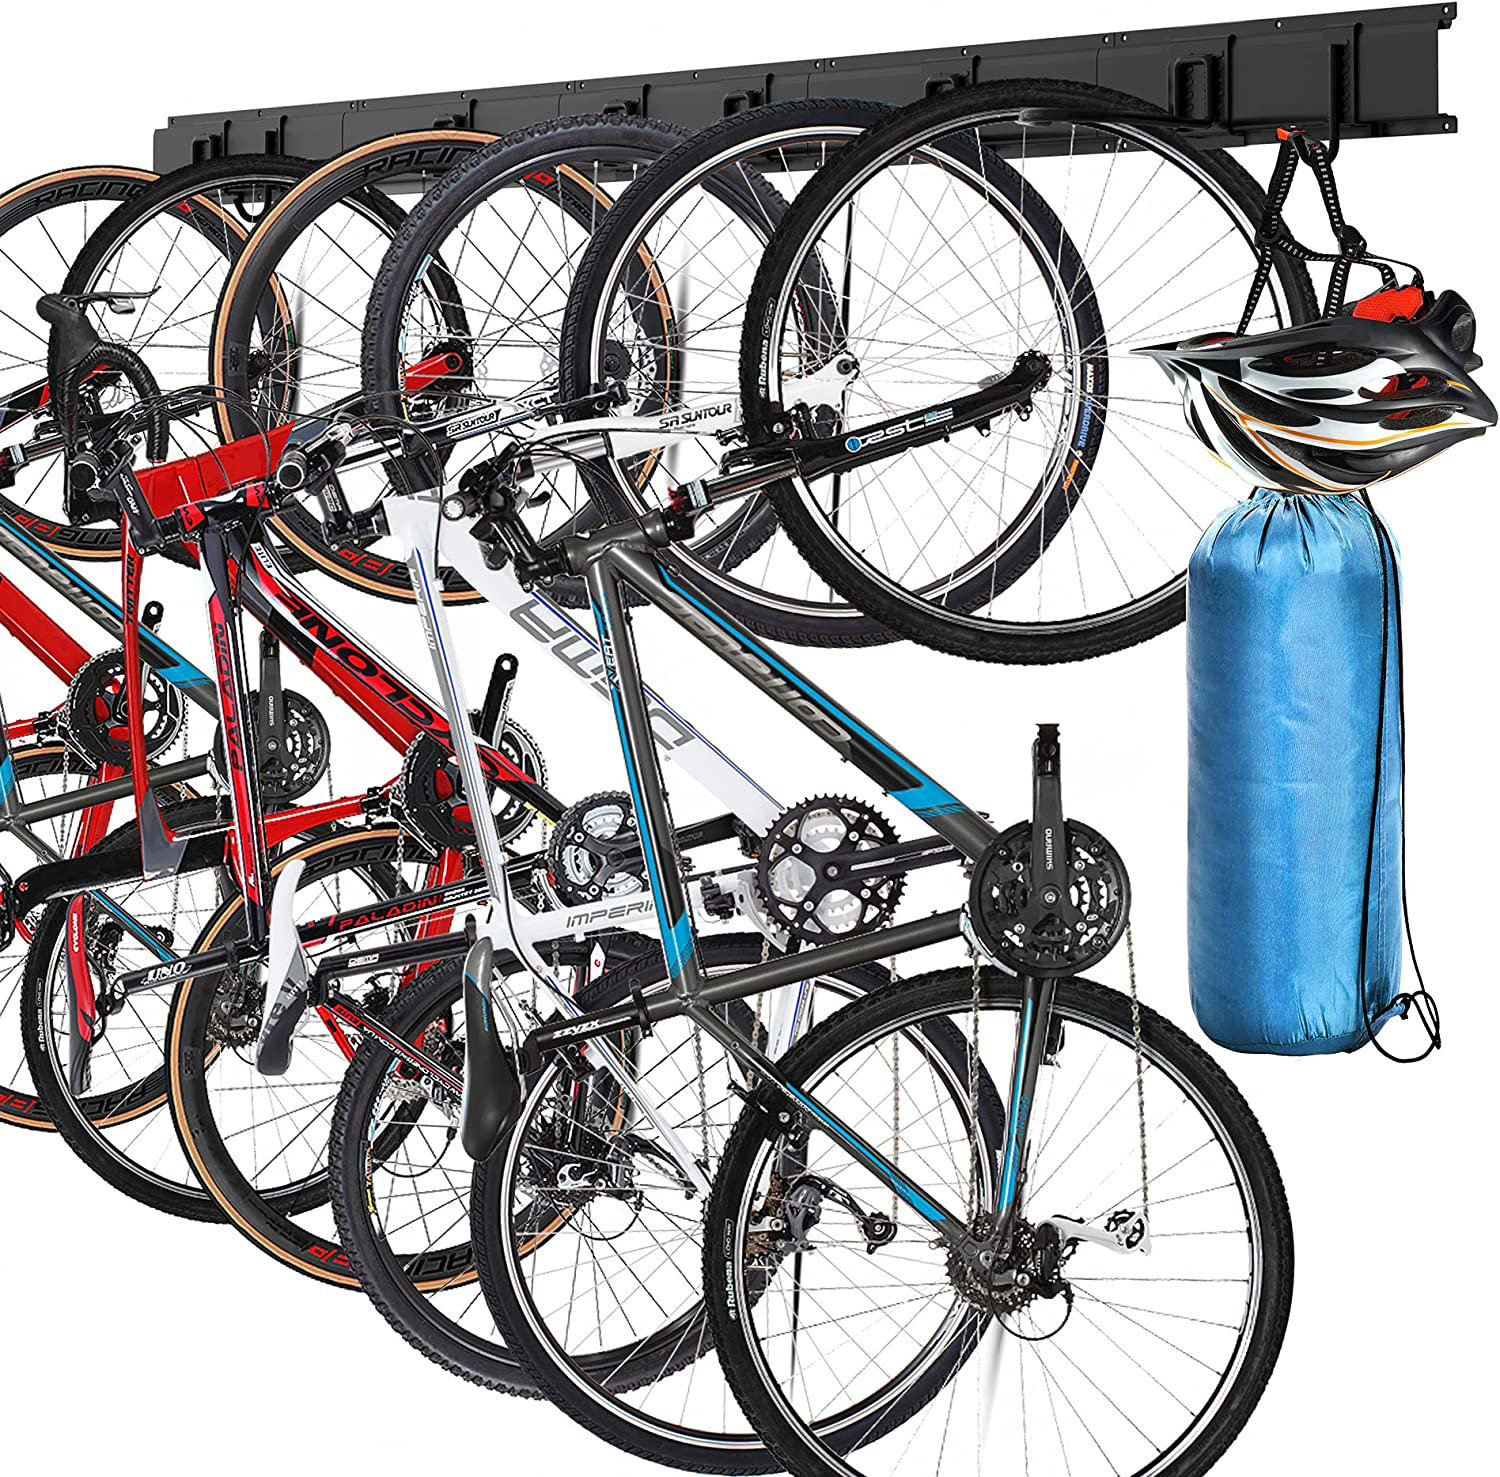 Arlmont & Co. Boan Wall Mounted Bike Rack, Garage Bicycle Wall Mount Hanger  with 8 hooks, Cycle Stand for 6 Bikes